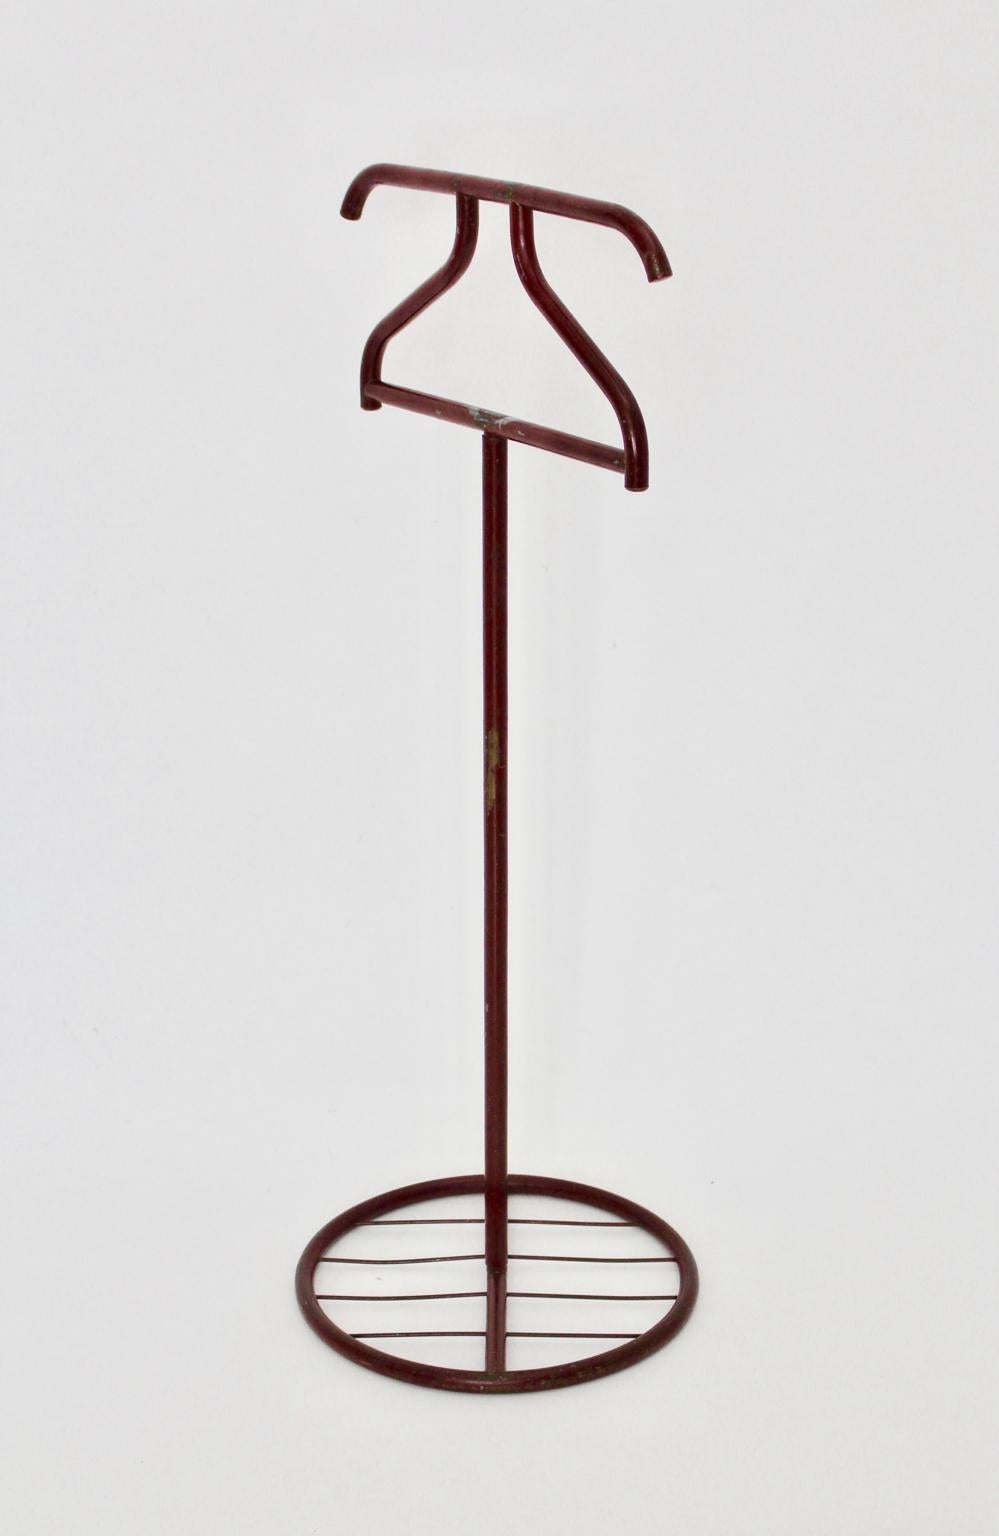 The dark red lacquered coat stand or valet by Hofmann and Augenfeld consists of tube steel and is easy to disassemble in three parts.
The both architects Felix Augenfeld and Karl Hofmann worked together in the 1920s and 1930s and furnished for the